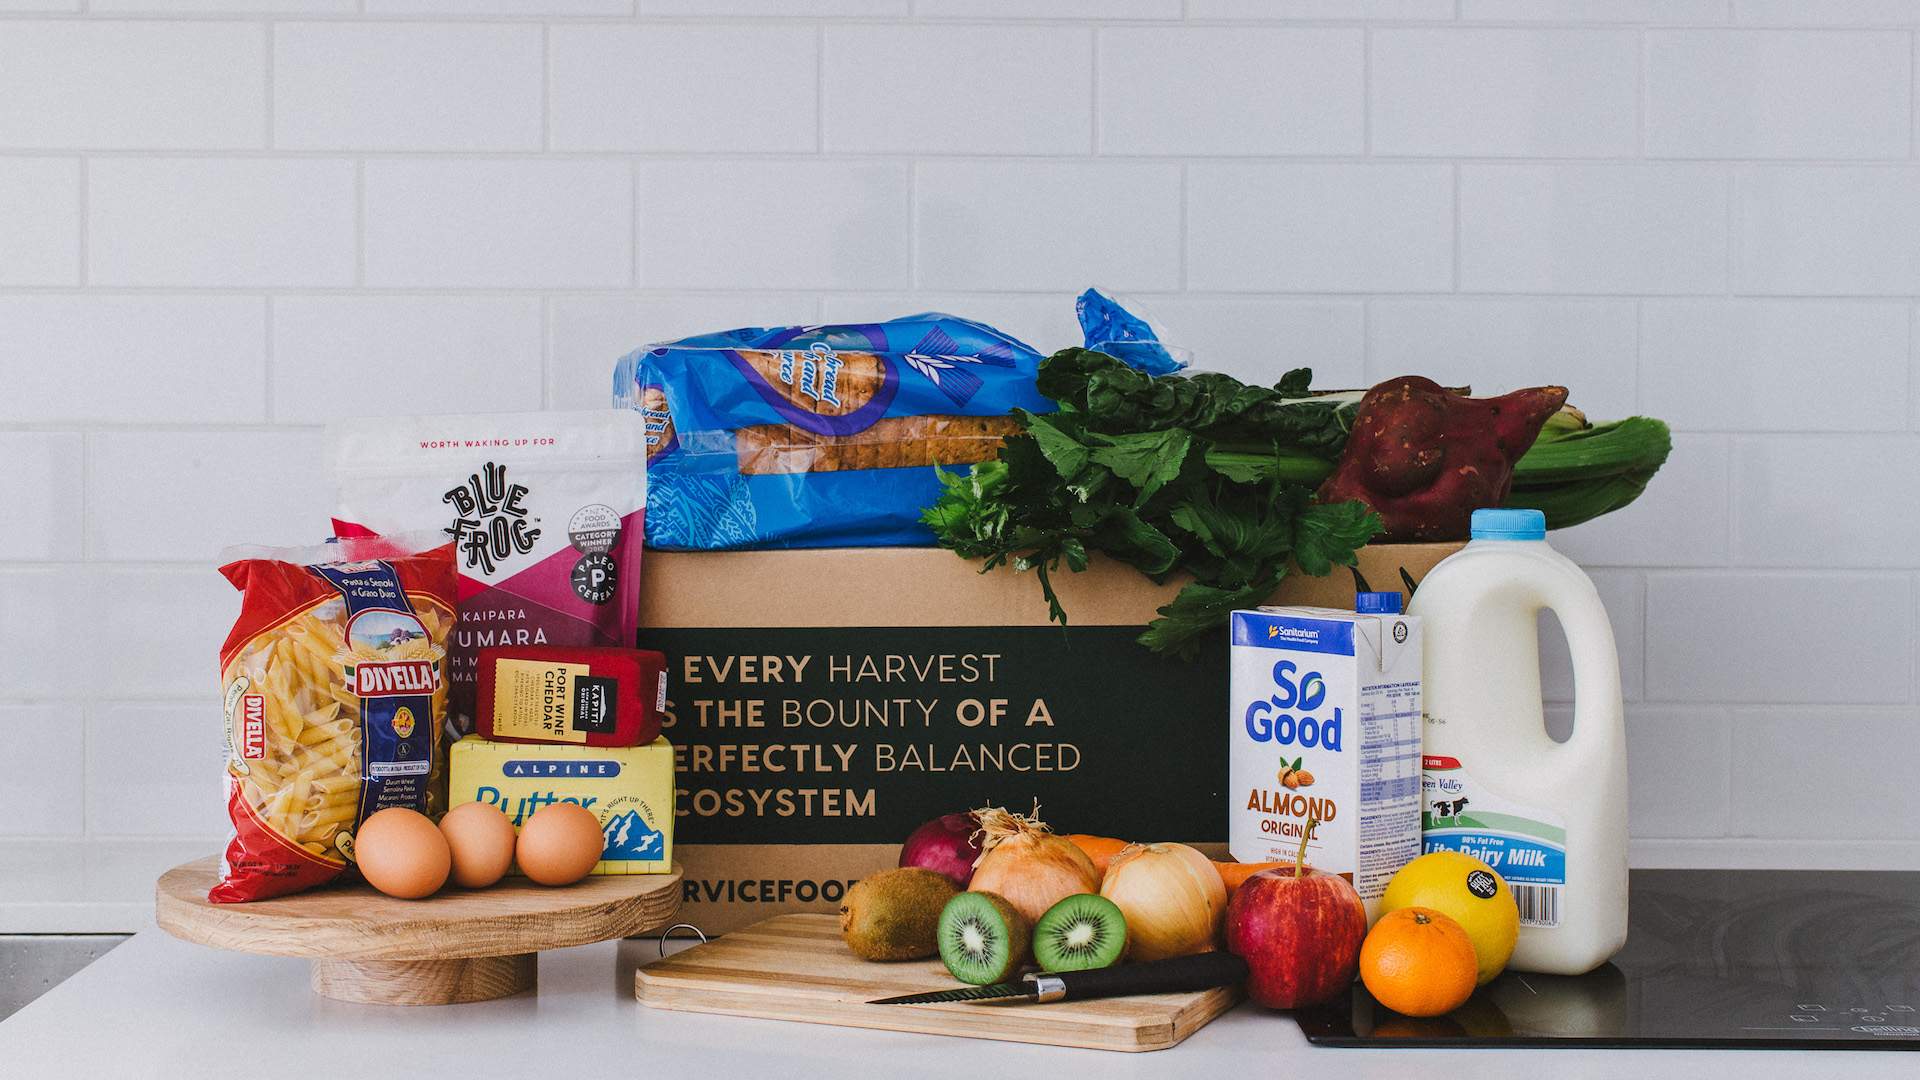 Service Foods Home Is a New Online Supermarket Offering Essential and Gourmet Ingredients